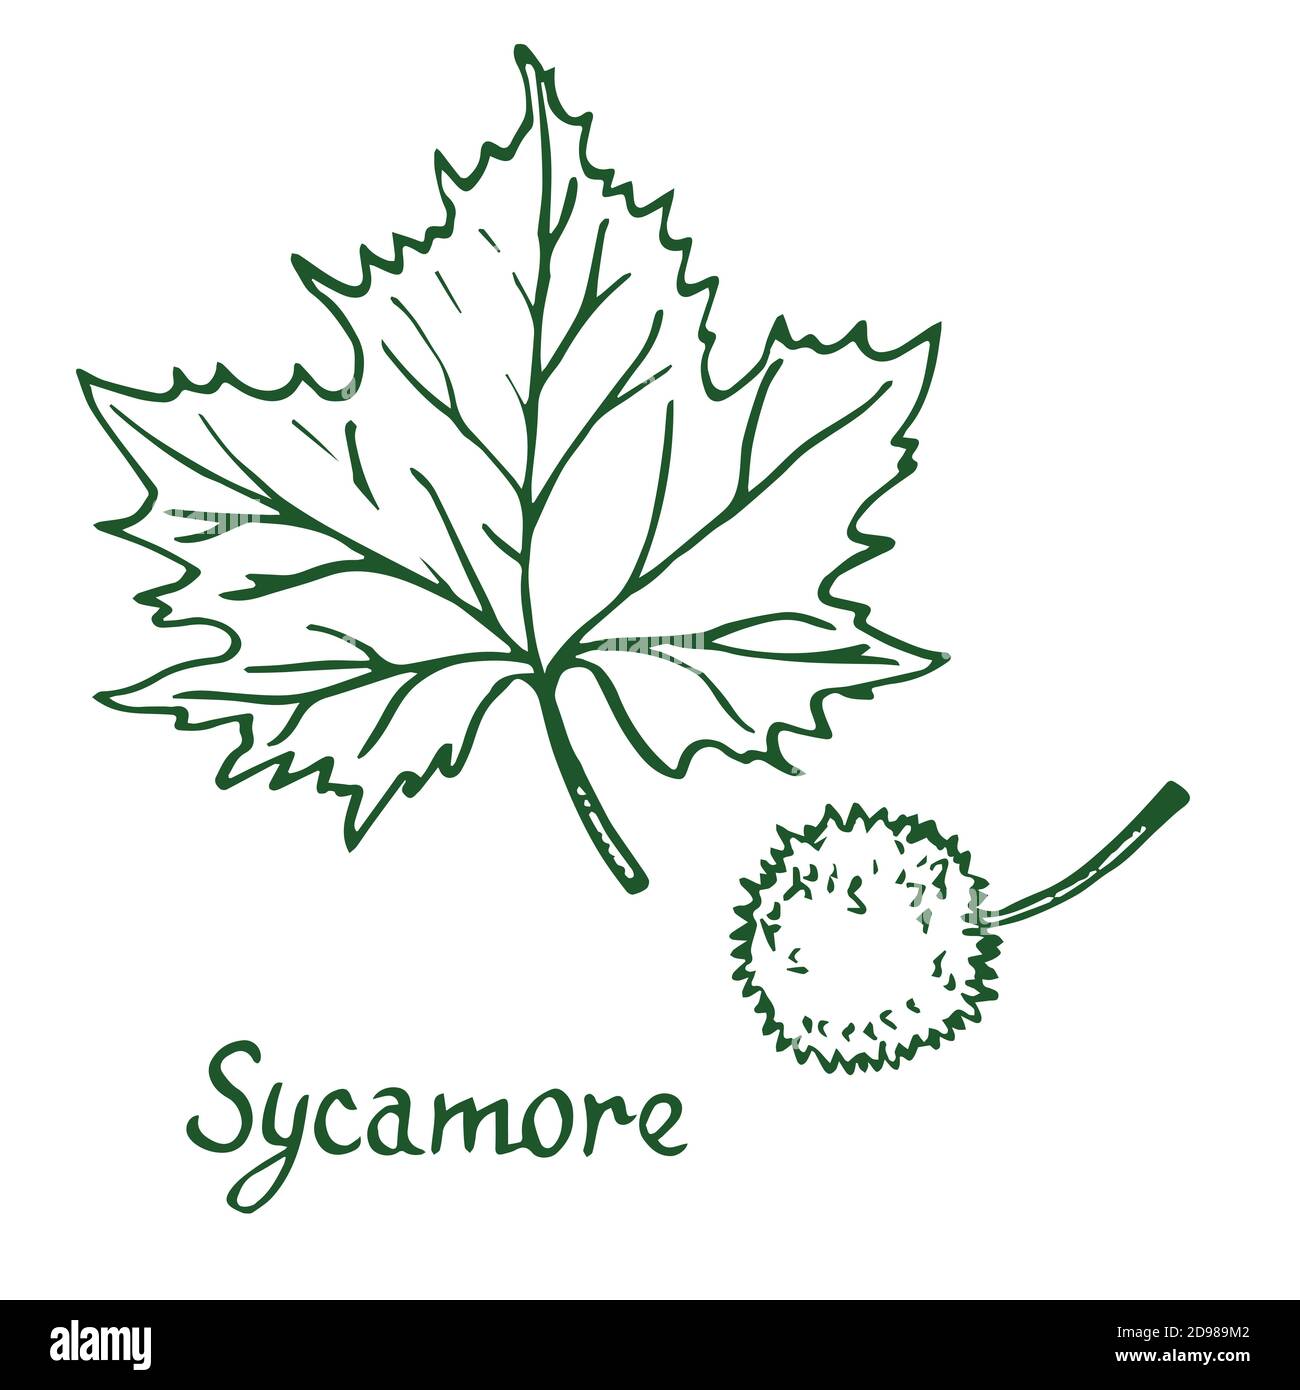 Sycamore (american sycamore tree, platanus occidentalis) Leaf and fruit, hand drawn doodle, sketch in woodcut style, illustration Stock Photo